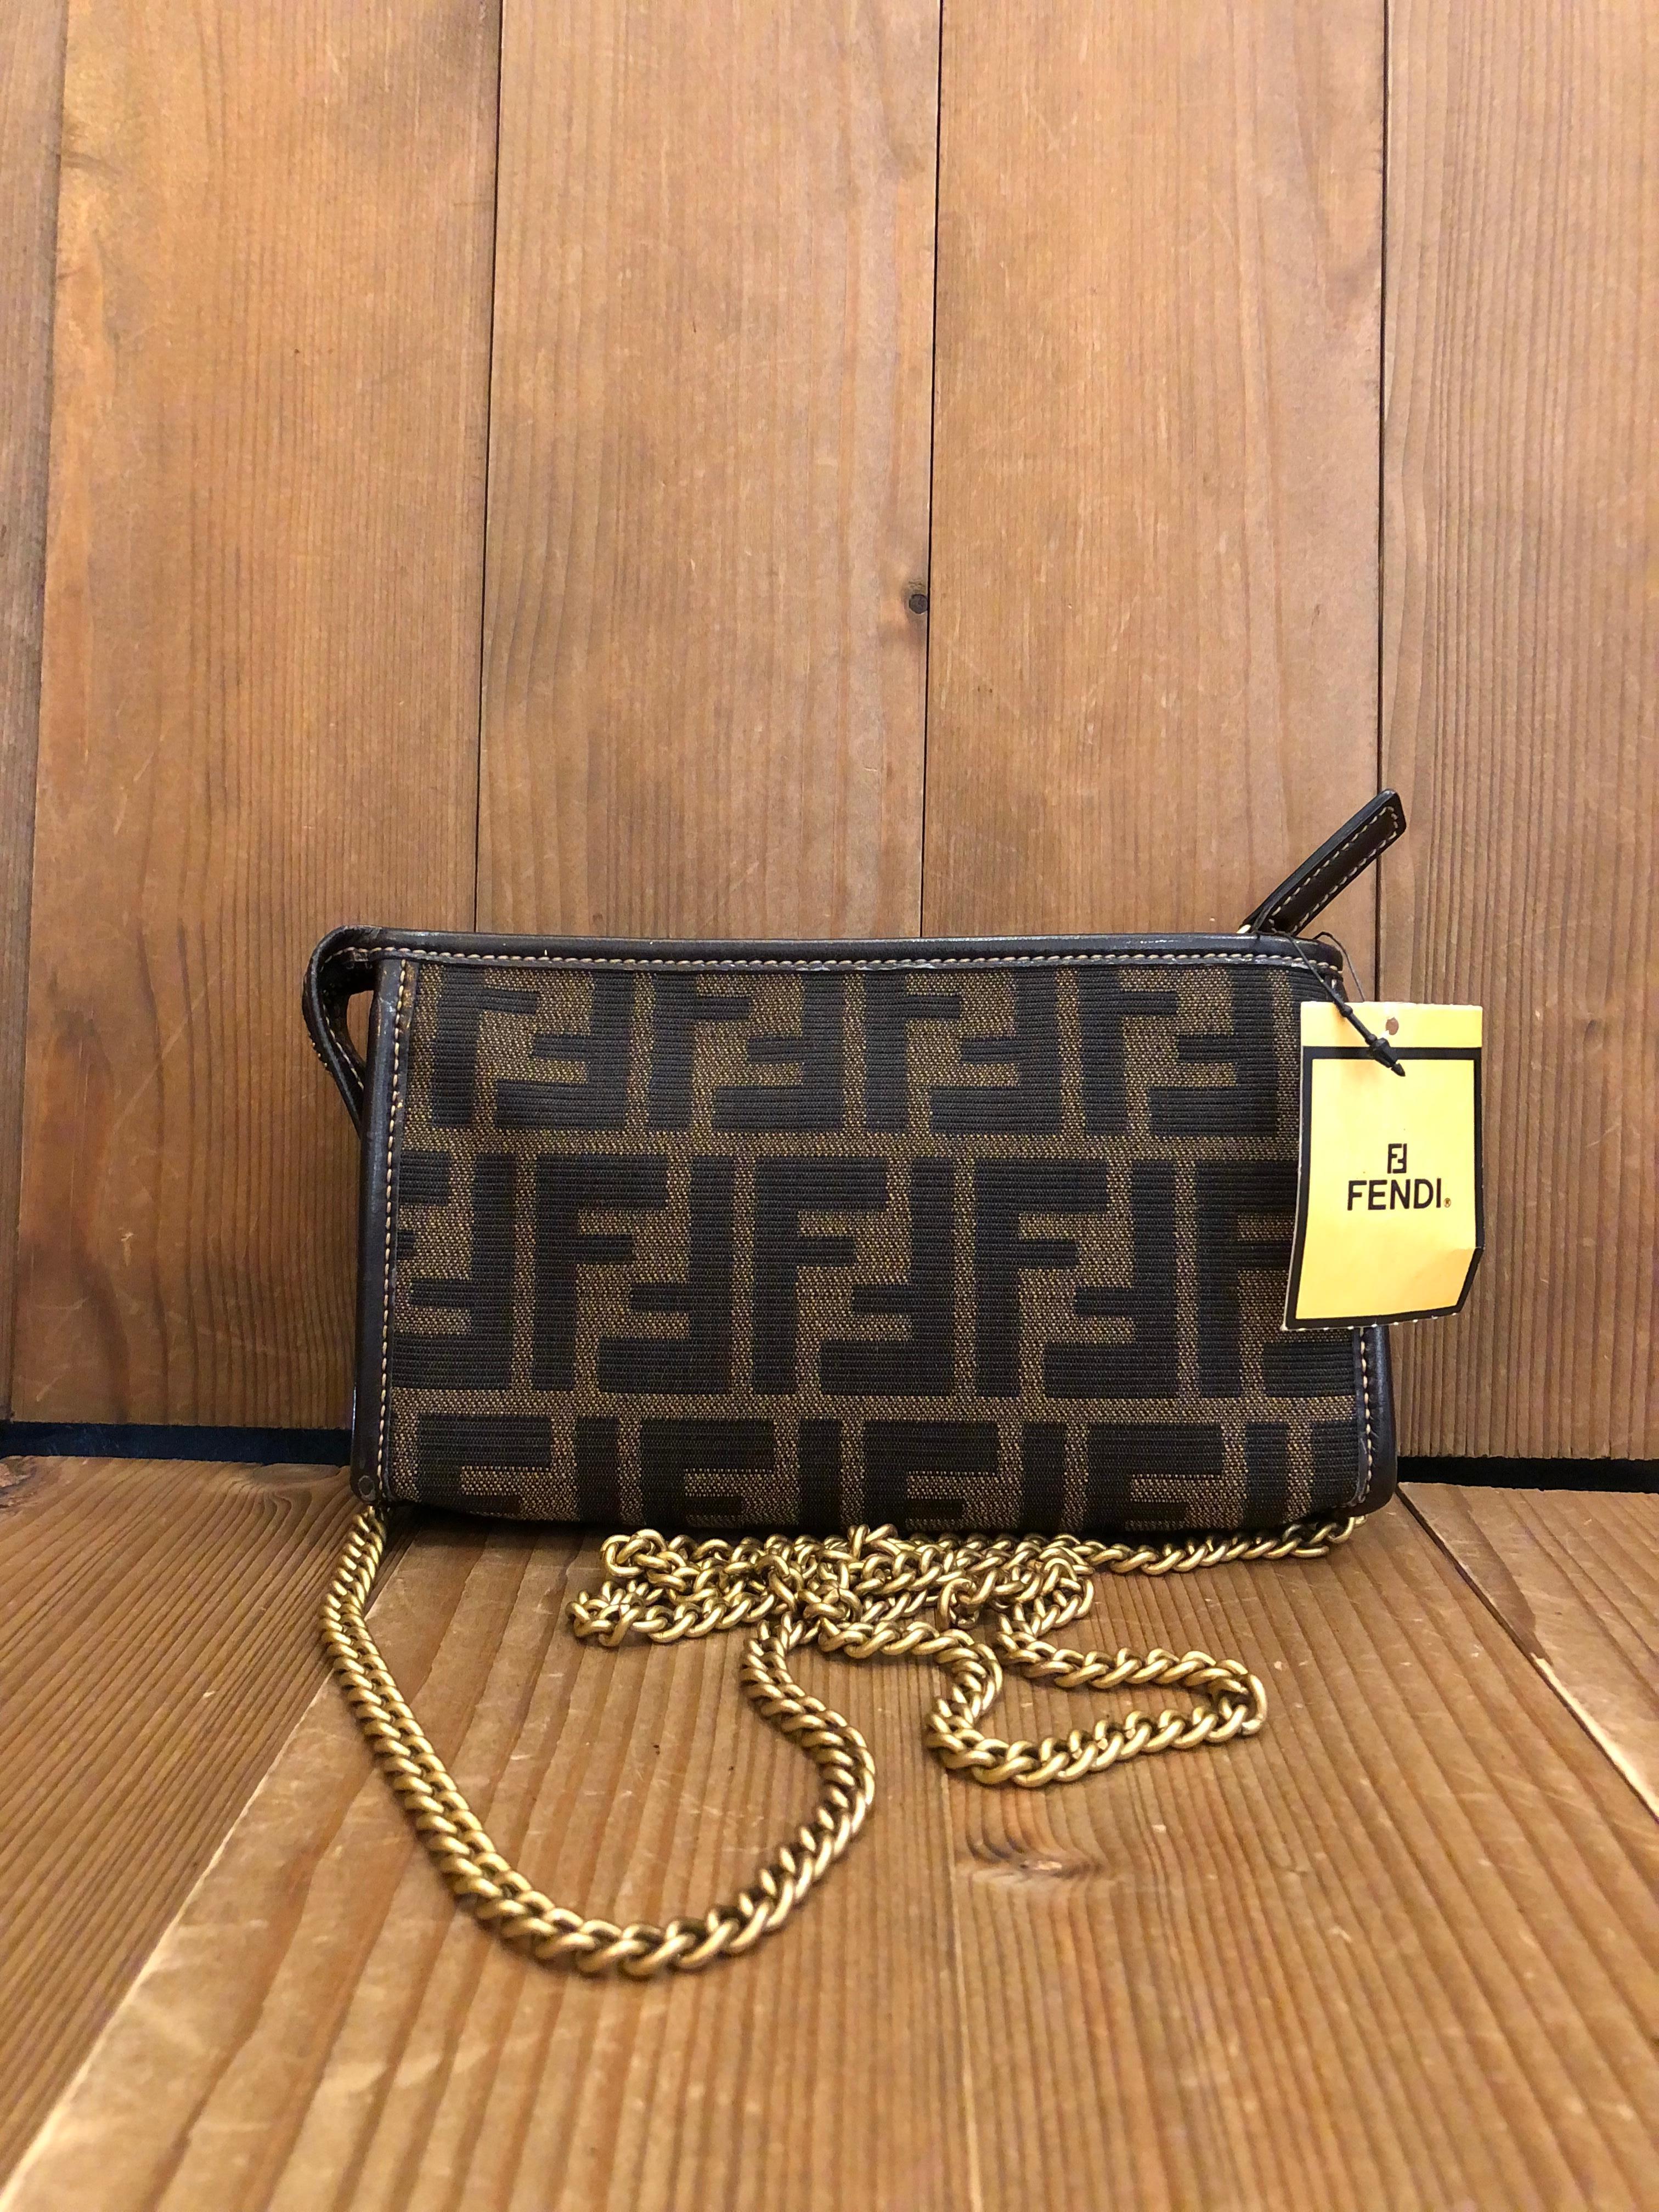 This vintage FENDI pouch is crafted of Fendi's iconic Zucca jacquard in brown trimmed with  leather featuring gold toned hardware. Top zipper closure opens to a beige colored interior. Non-Fendi hardware is added to secure a chain to carry the pouch